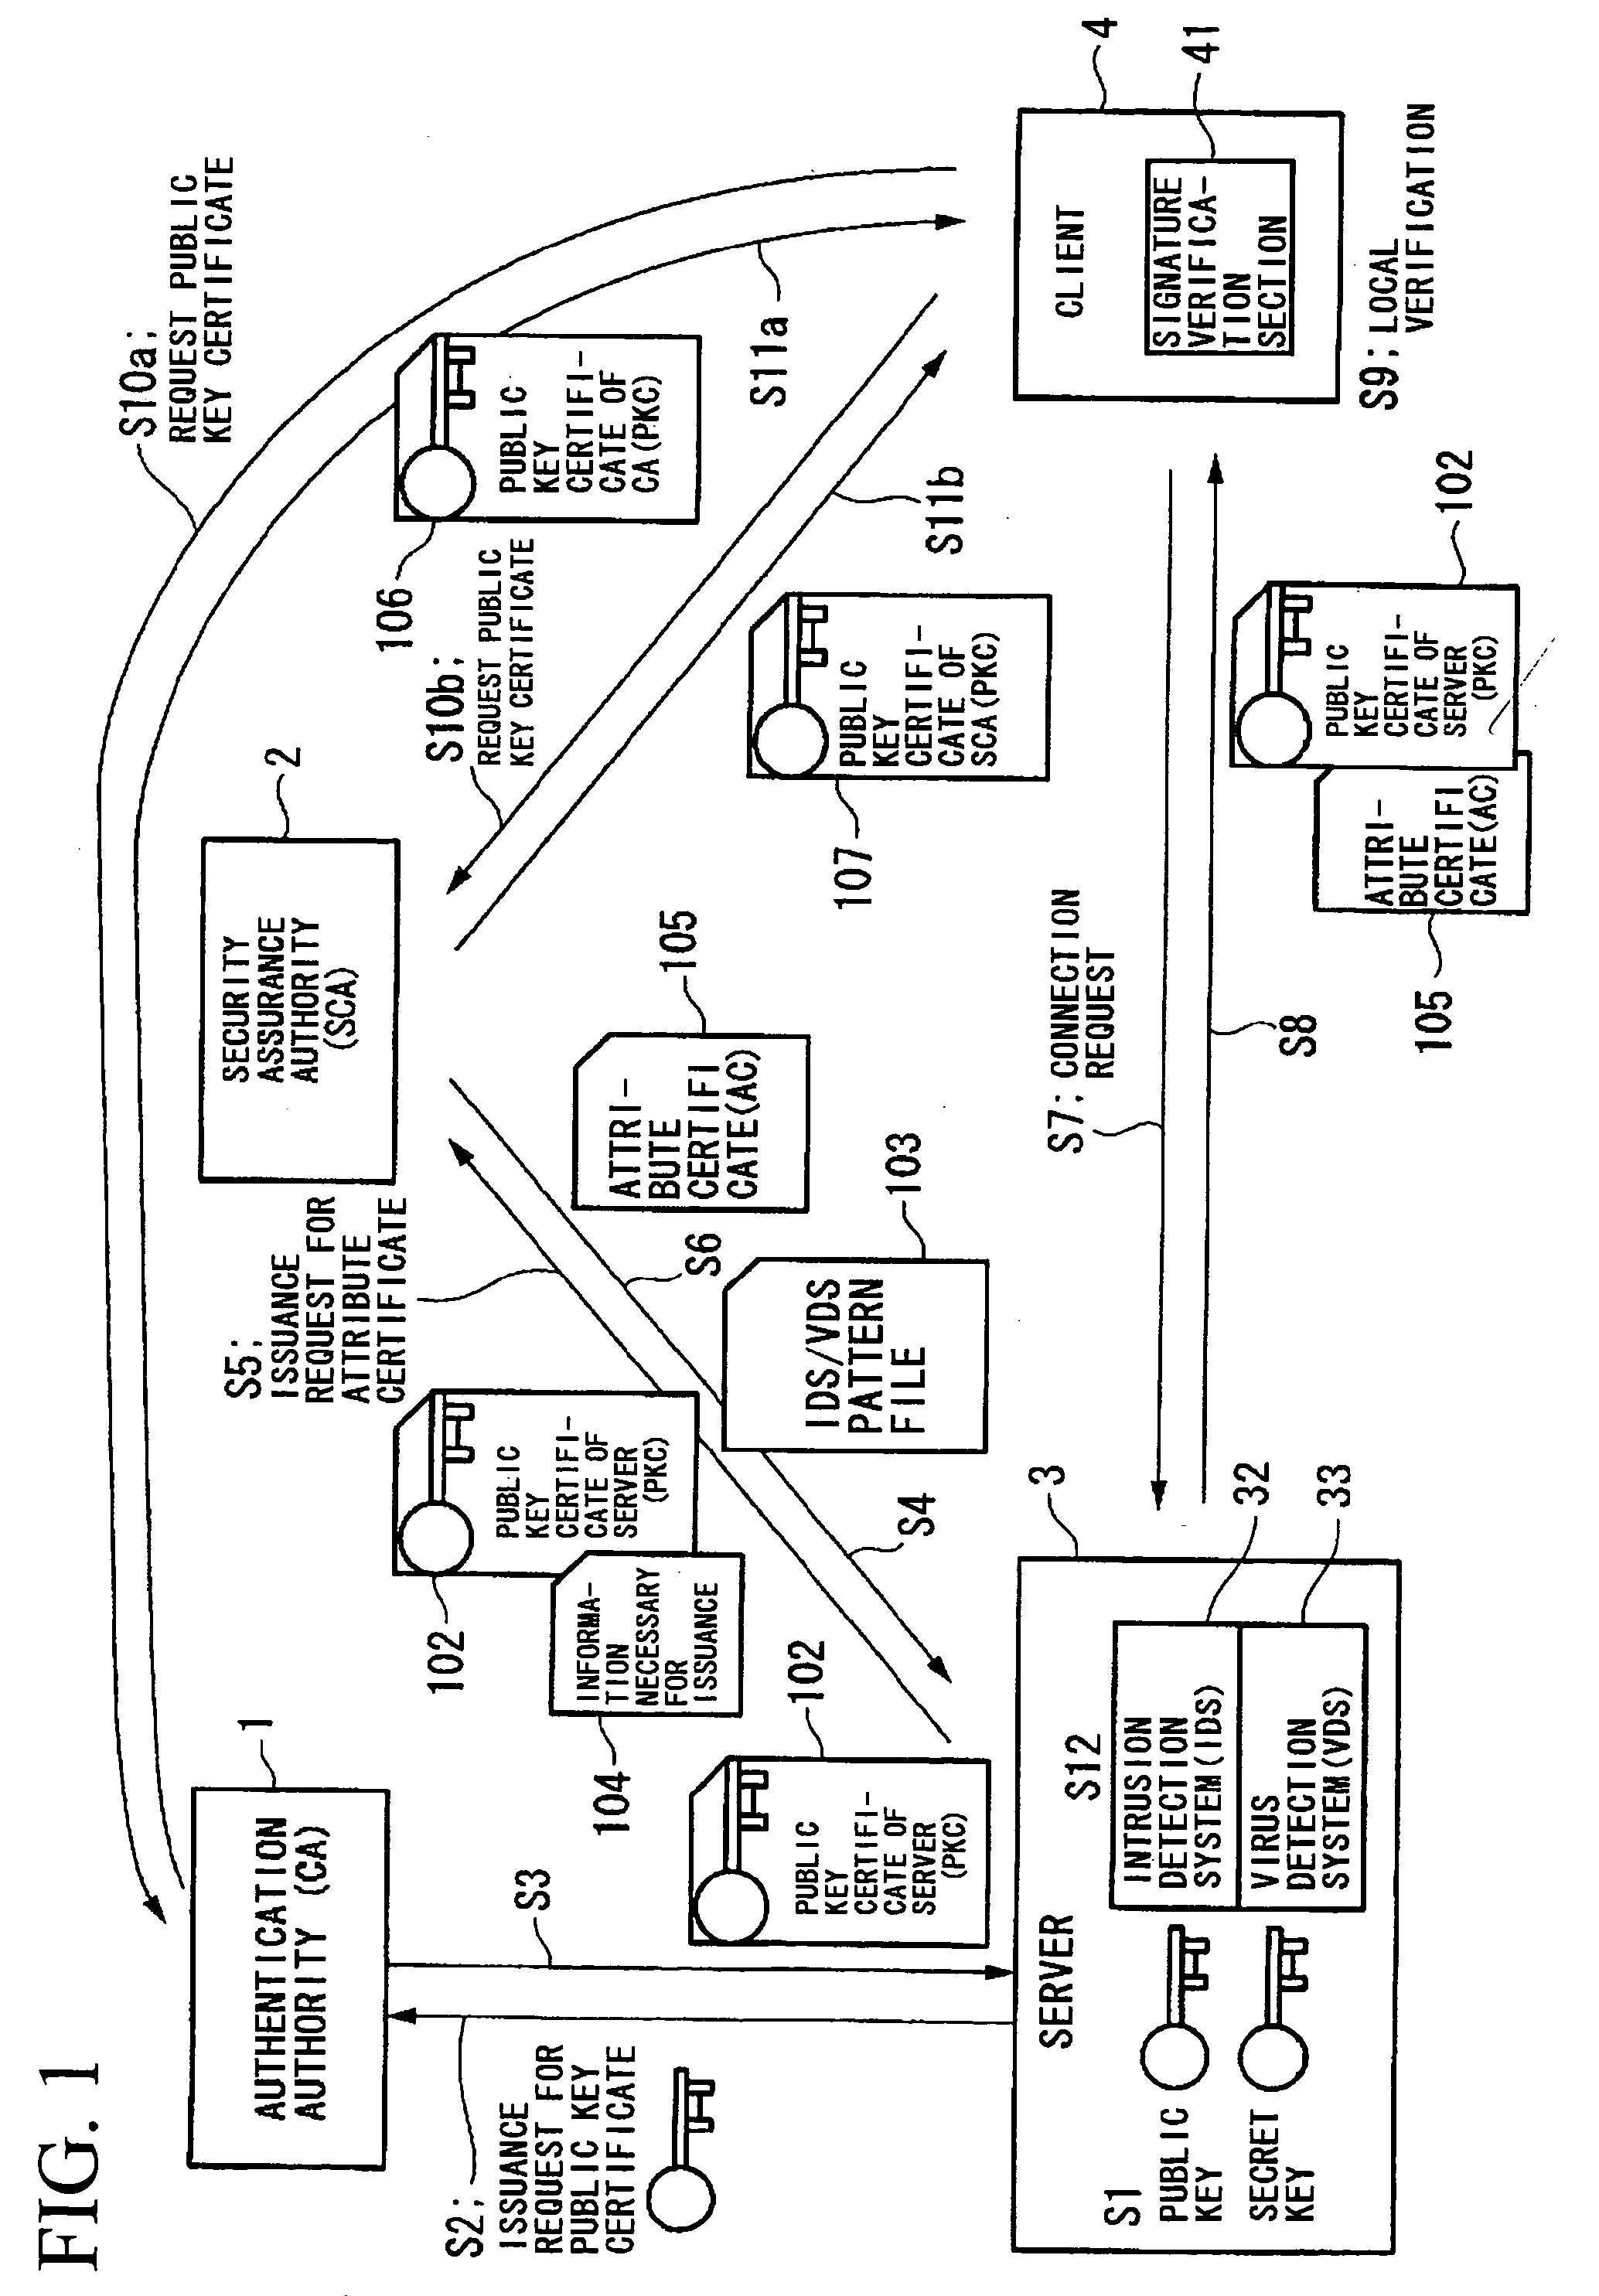 Communication system and security assurance device